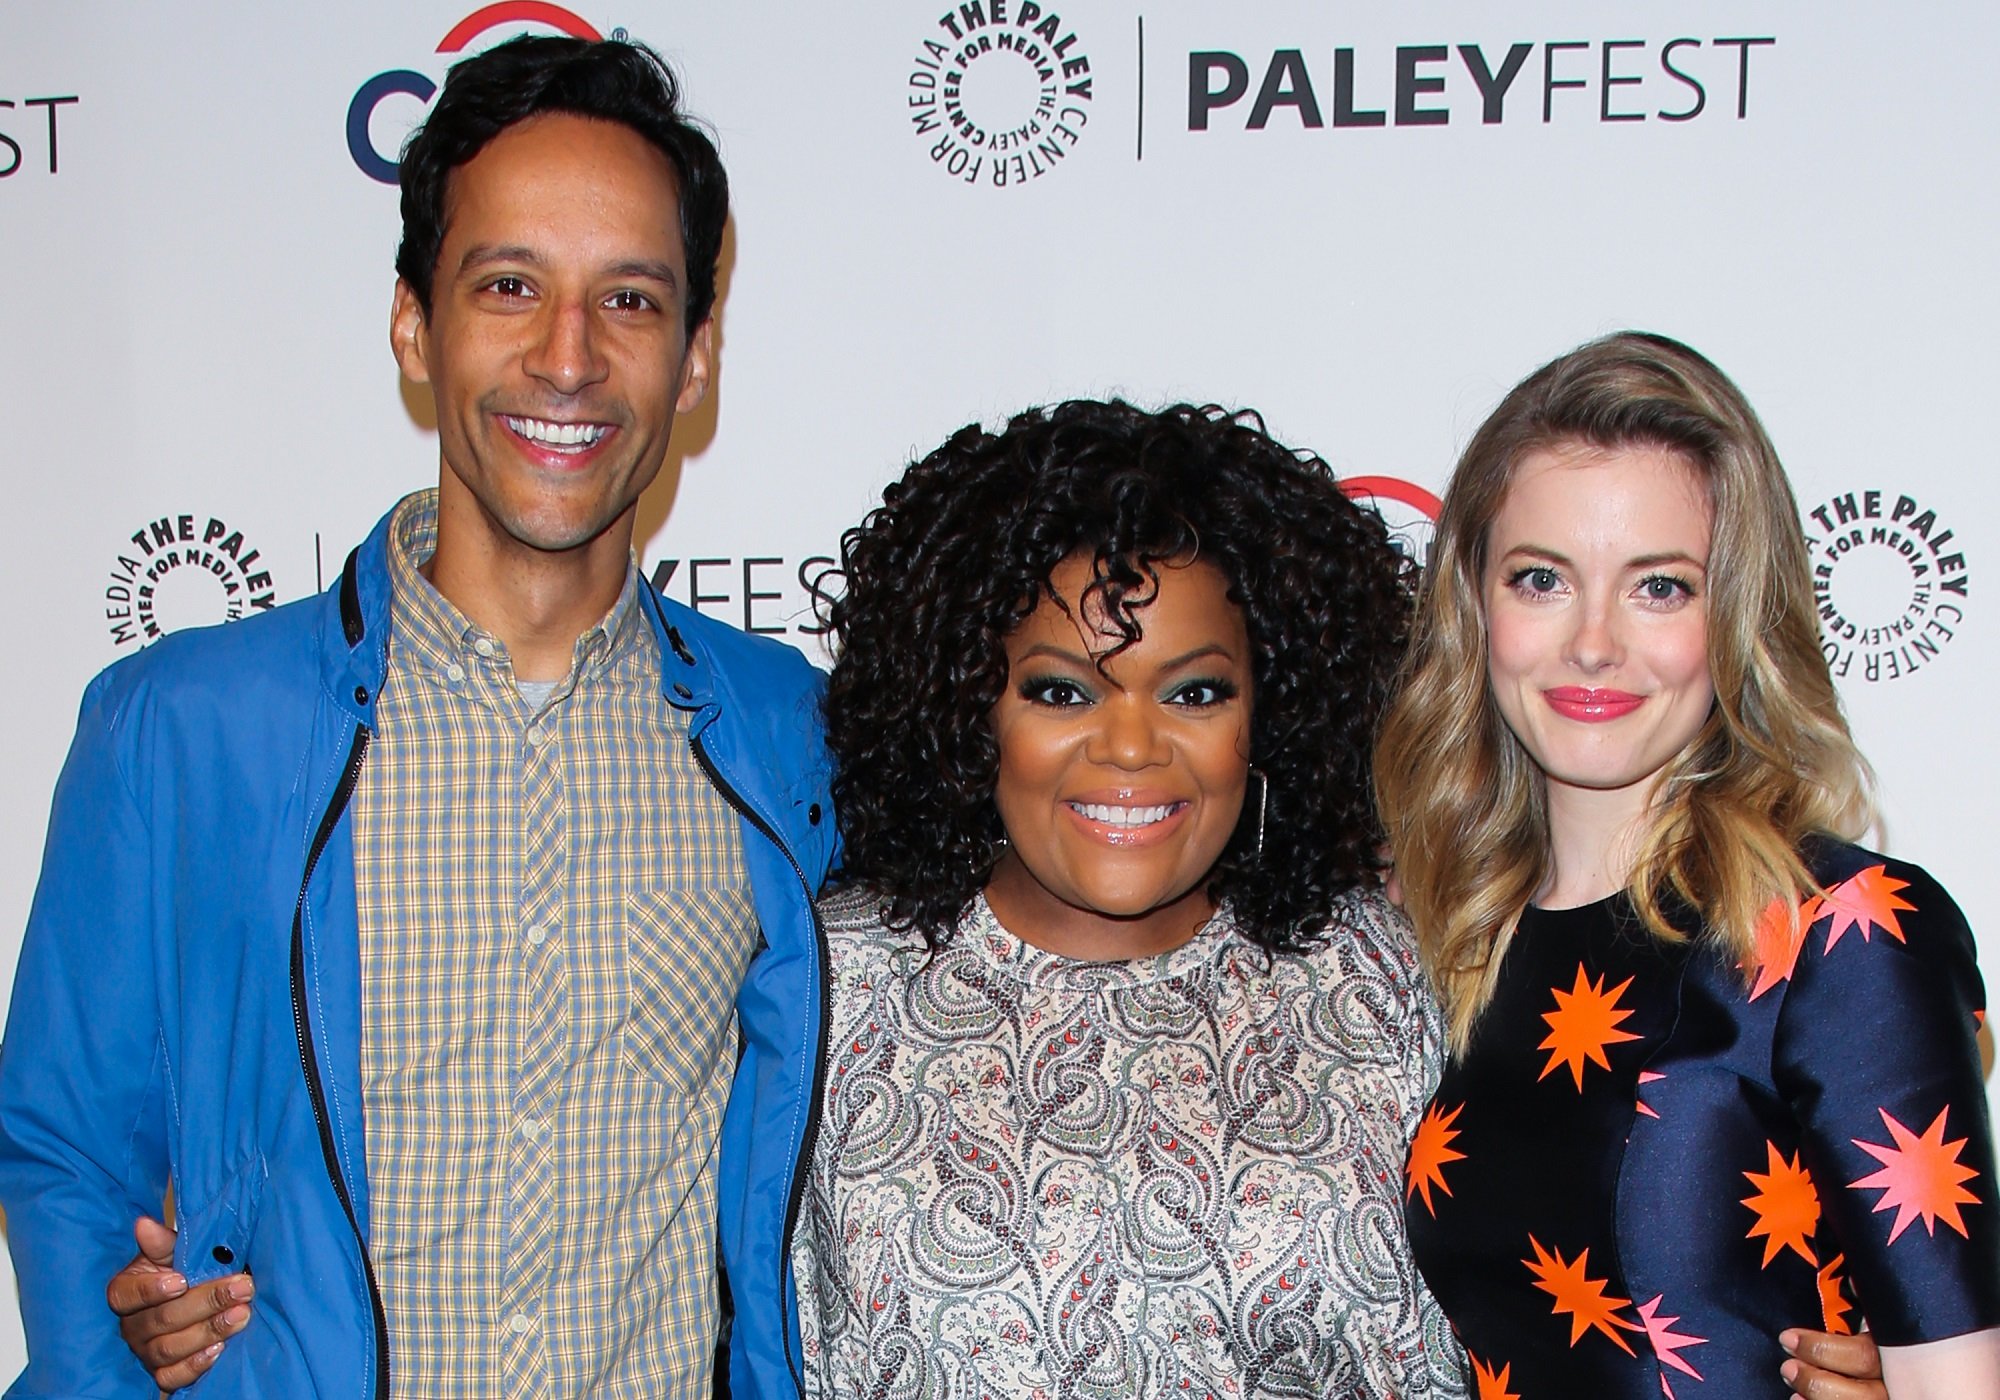 Danny Pudi, Yvette Nicole Brown, and Gillian Jacobs of Community